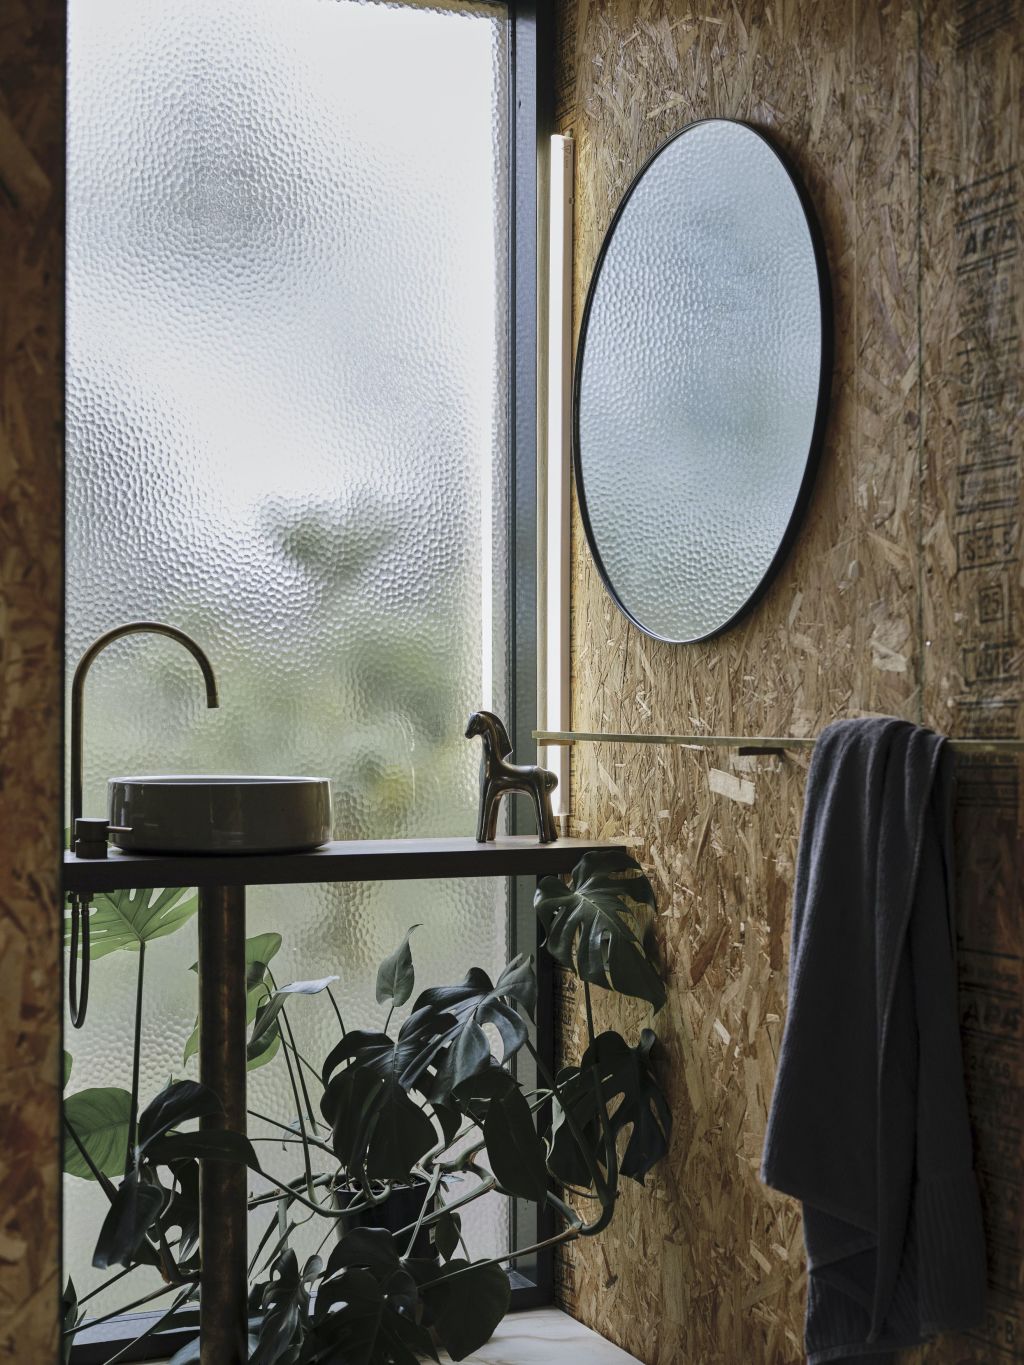 With a full-height dimpled-glass window, the texture of SIPS wall and the sculptural basin, the bathroom is a moment of delight. Photo: Adam Gibson